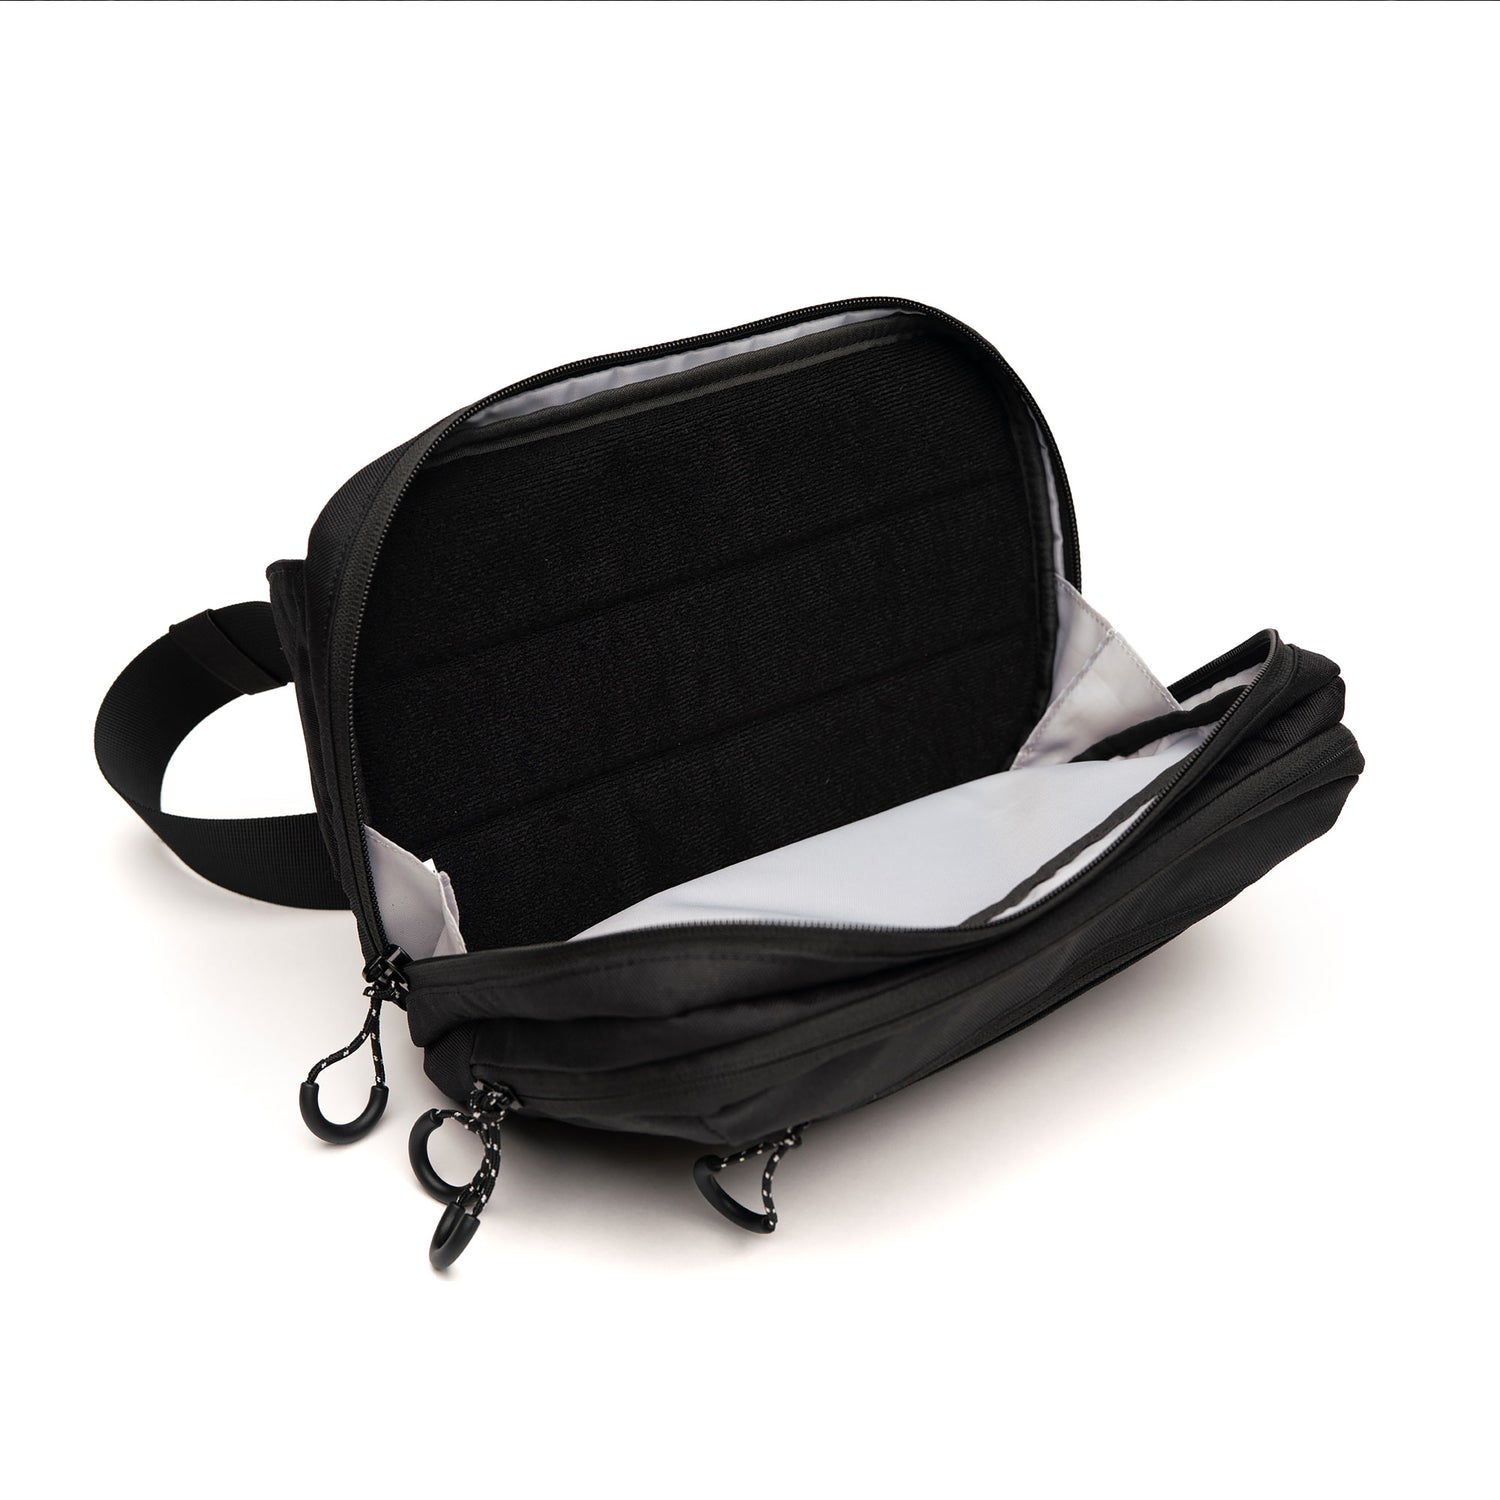 Wide mouth opening for easy access on the Grunt Style EDC Fanny Pack with an attachment surface that allows for concealing items